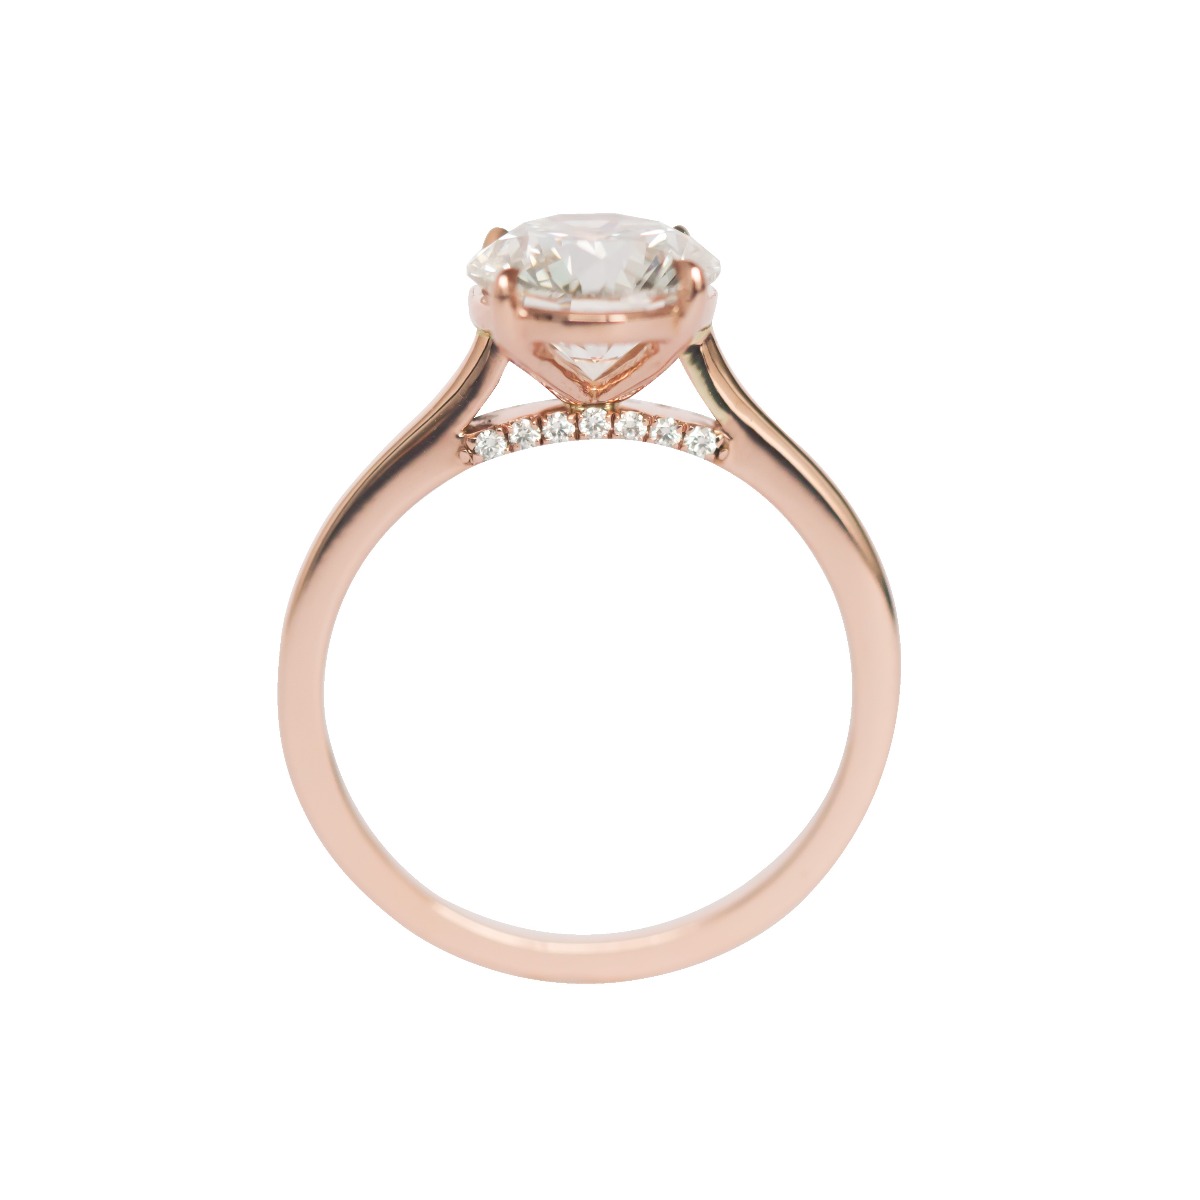 DBK Classic Solitaire Setting With Diamond Bridge Only in Rose Gold